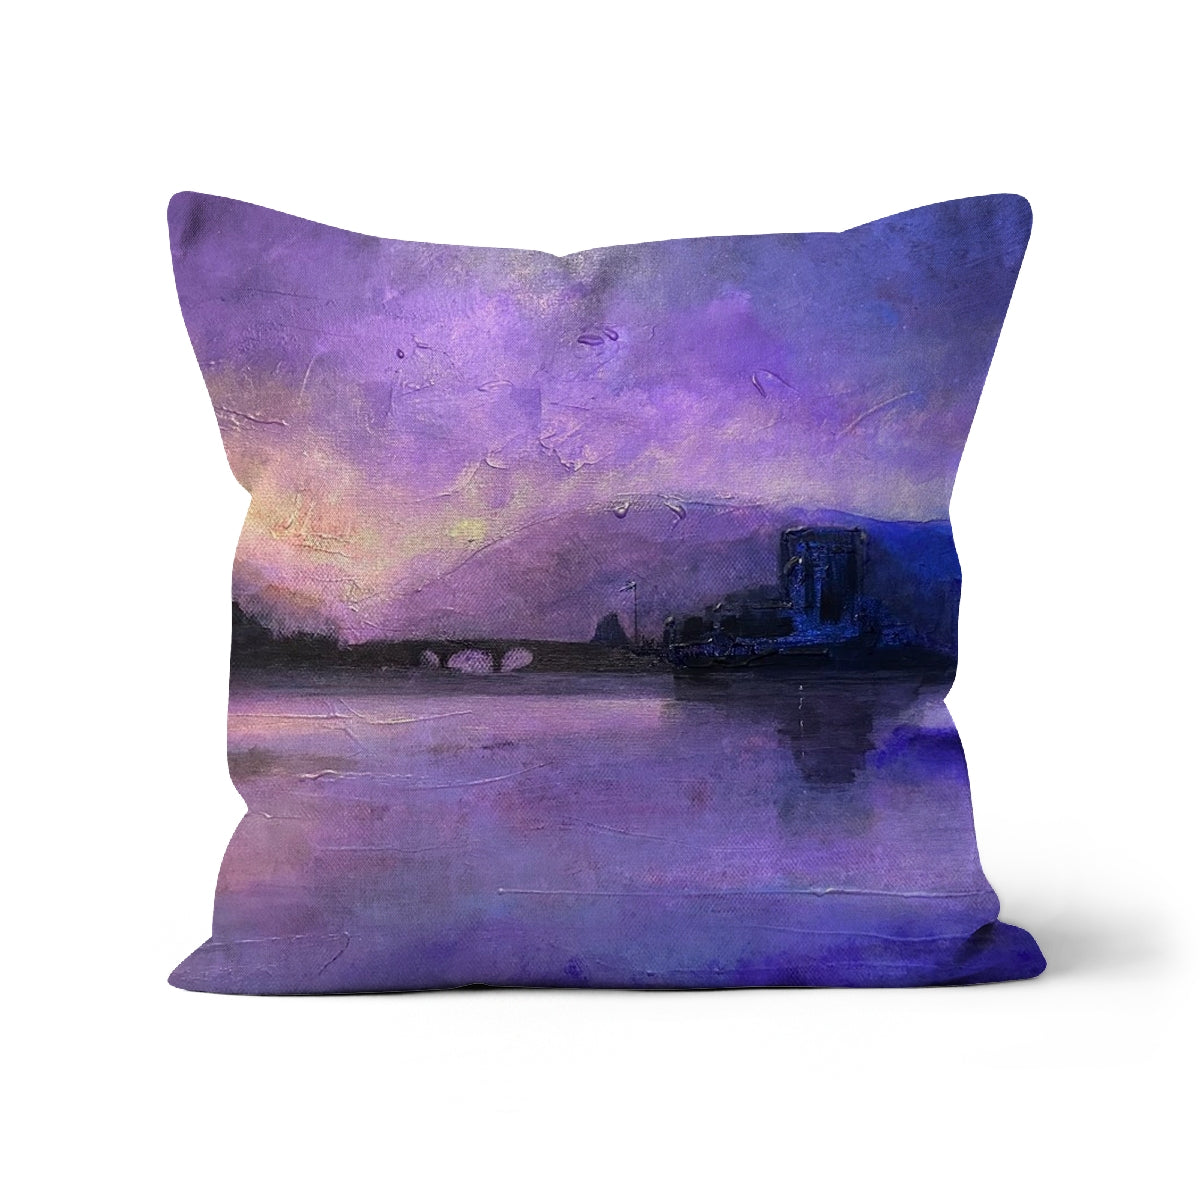 Eilean Donan Castle Moonset Art Gifts Cushion-Cushions-Historic & Iconic Scotland Art Gallery-Canvas-24"x24"-Paintings, Prints, Homeware, Art Gifts From Scotland By Scottish Artist Kevin Hunter